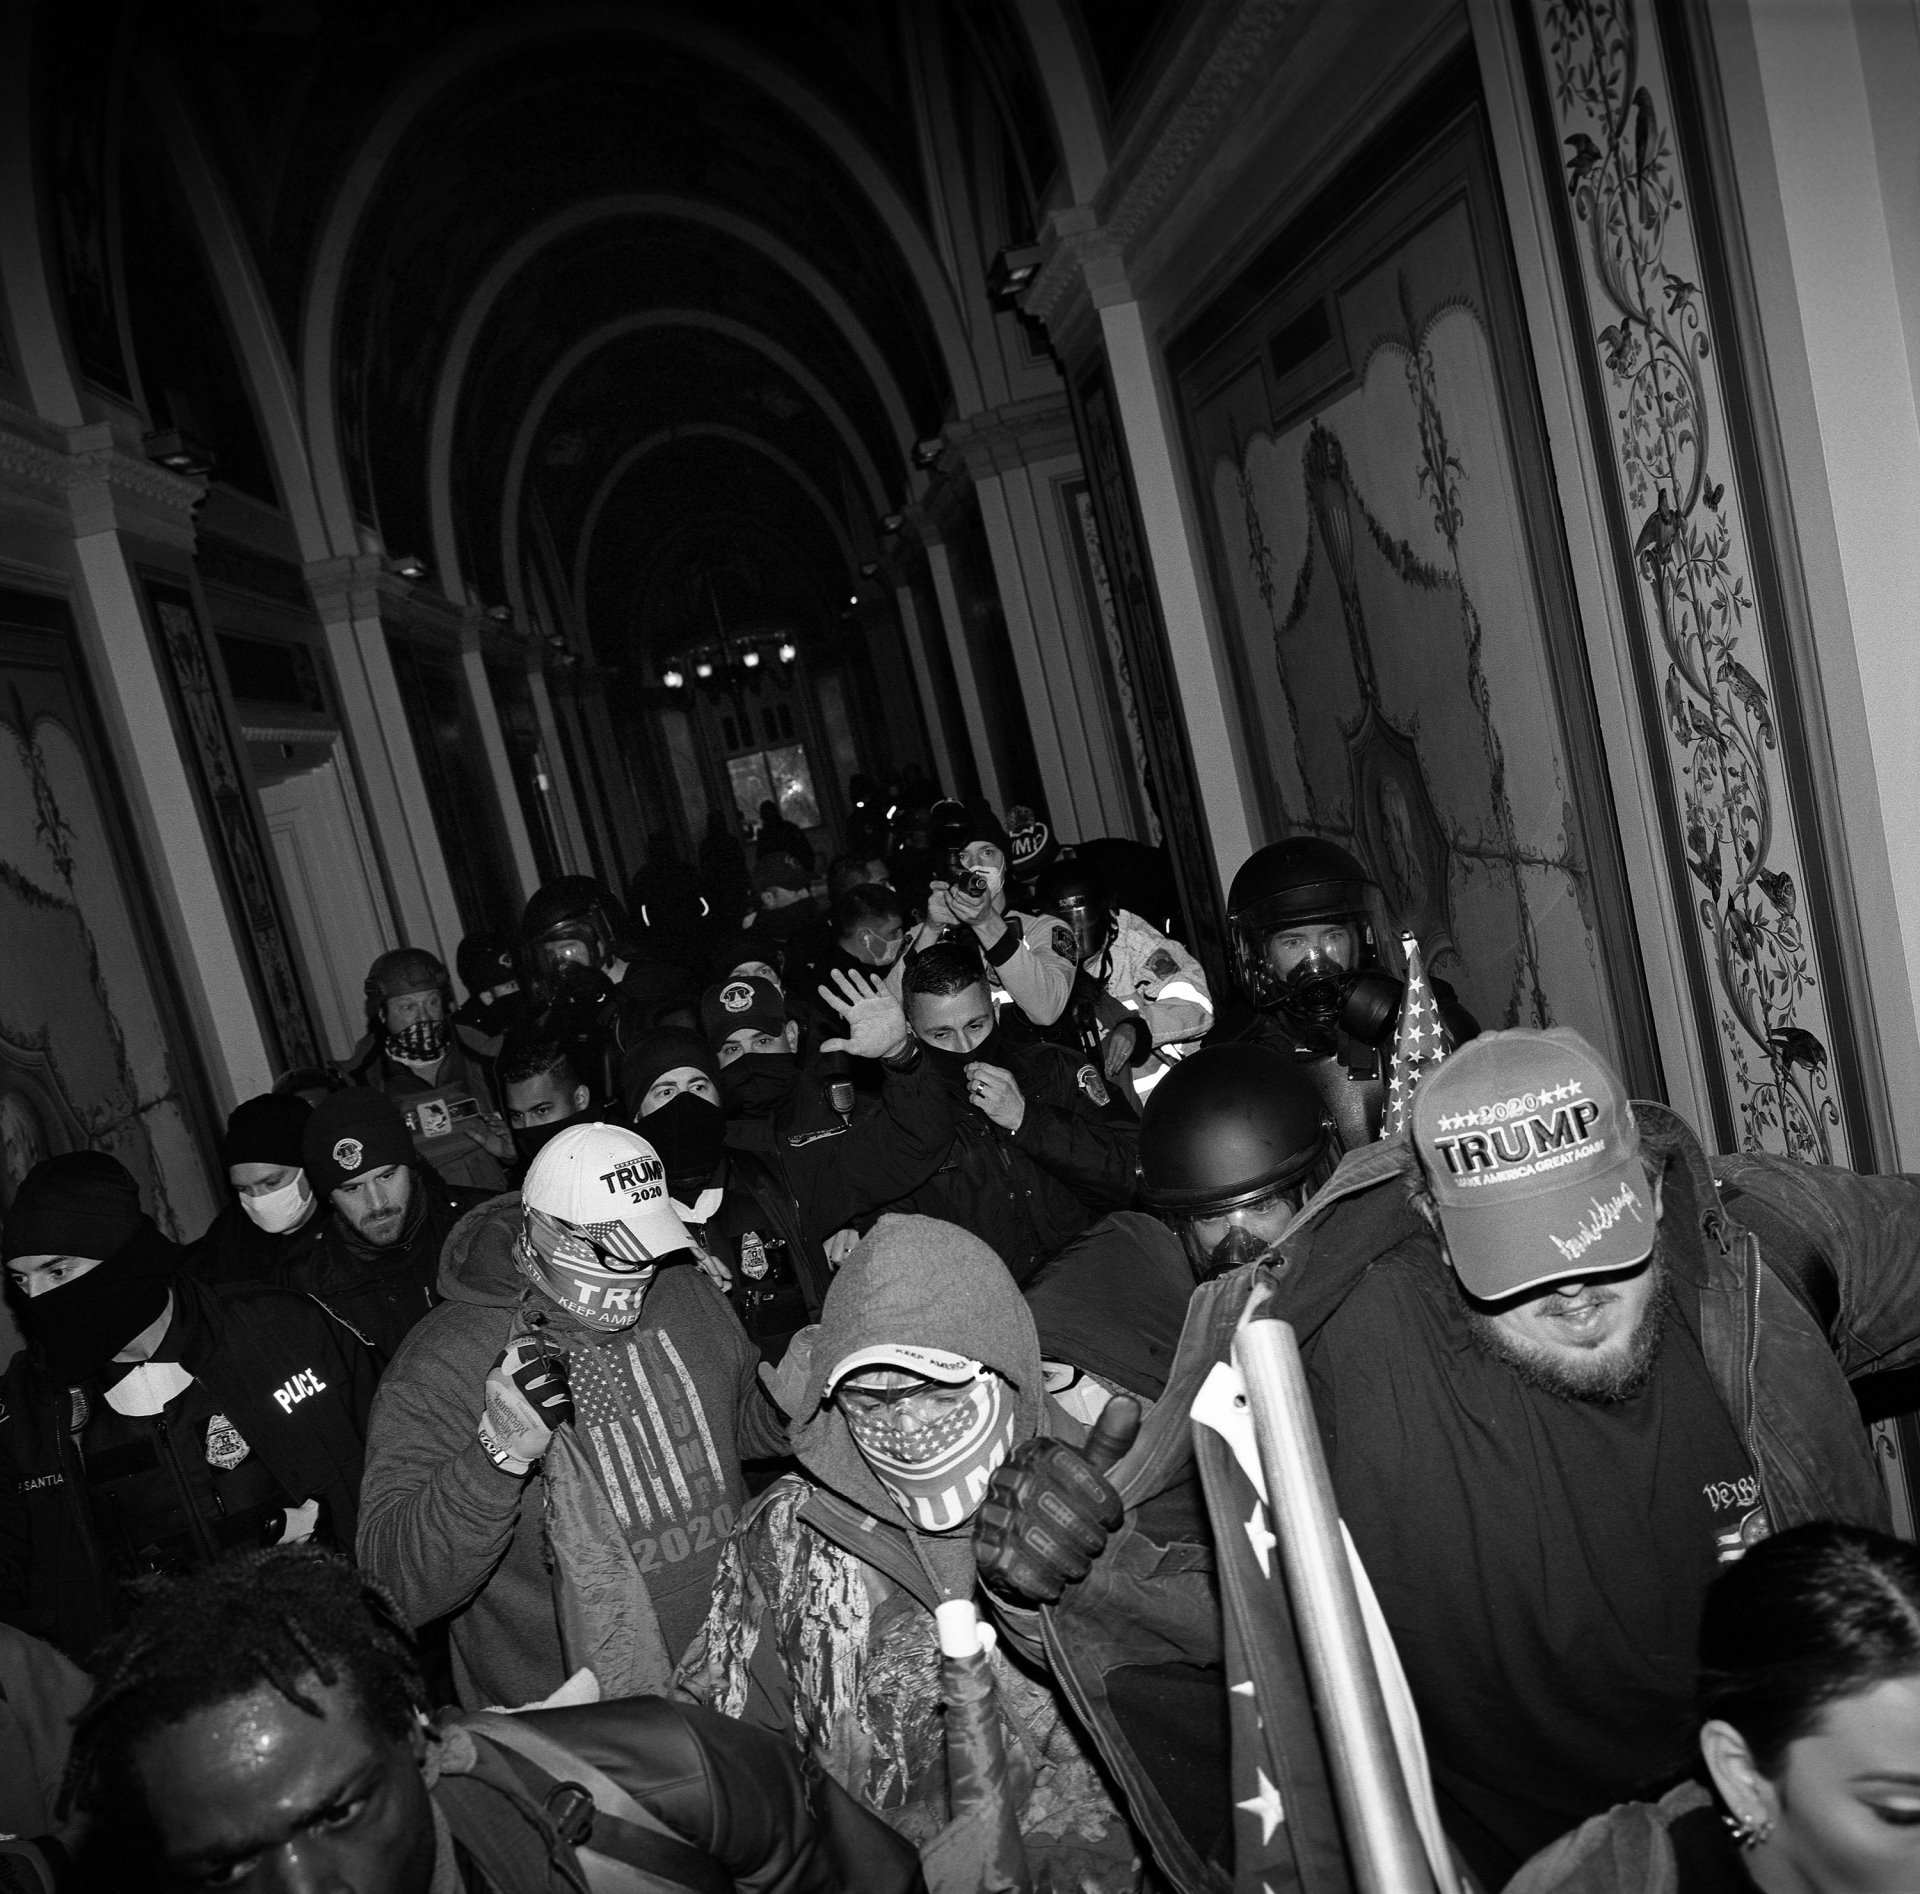 Pro-Trump supporters invade a Capitol hallway, after the building had been breached during a protest to overturn Joe Biden&rsquo;s electoral victory, in Washington DC, USA. The Capitol complex was locked down, and elected officials, including Vice-President Mike Pence, were hastily evacuated.